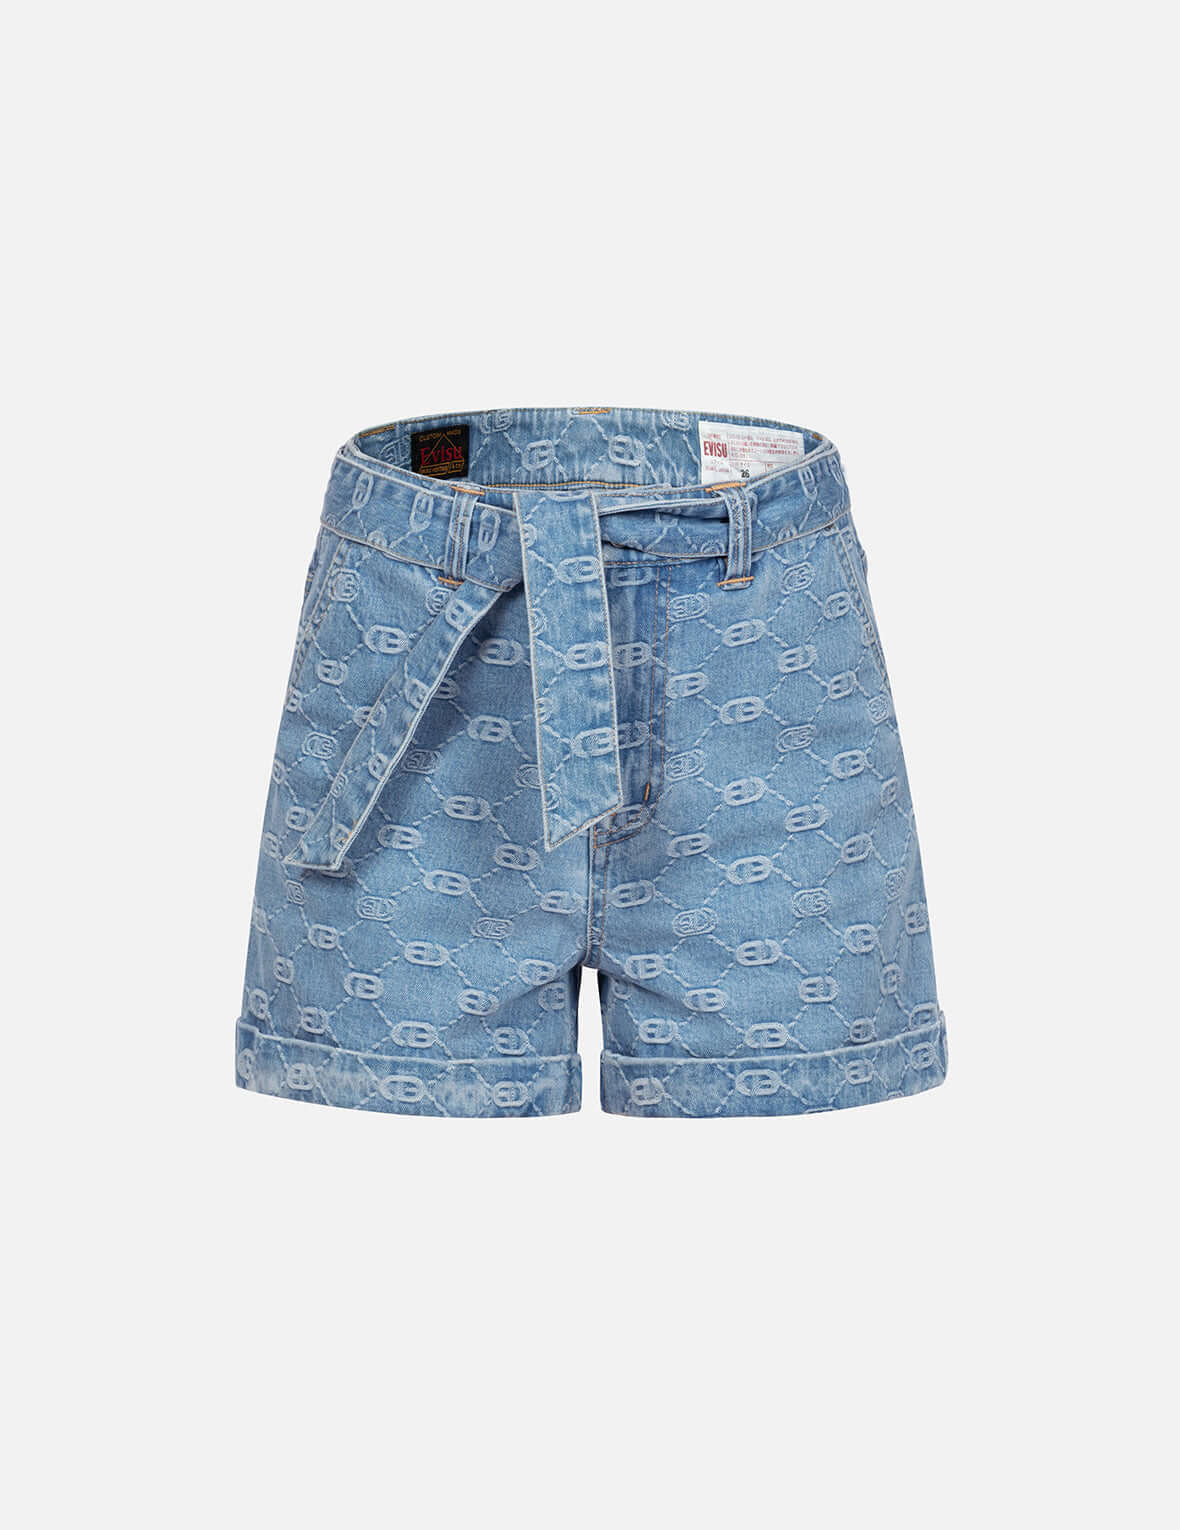 Evisu Allover With Pink Diamond Ironing Seagull Loose Fit Denim Shorts